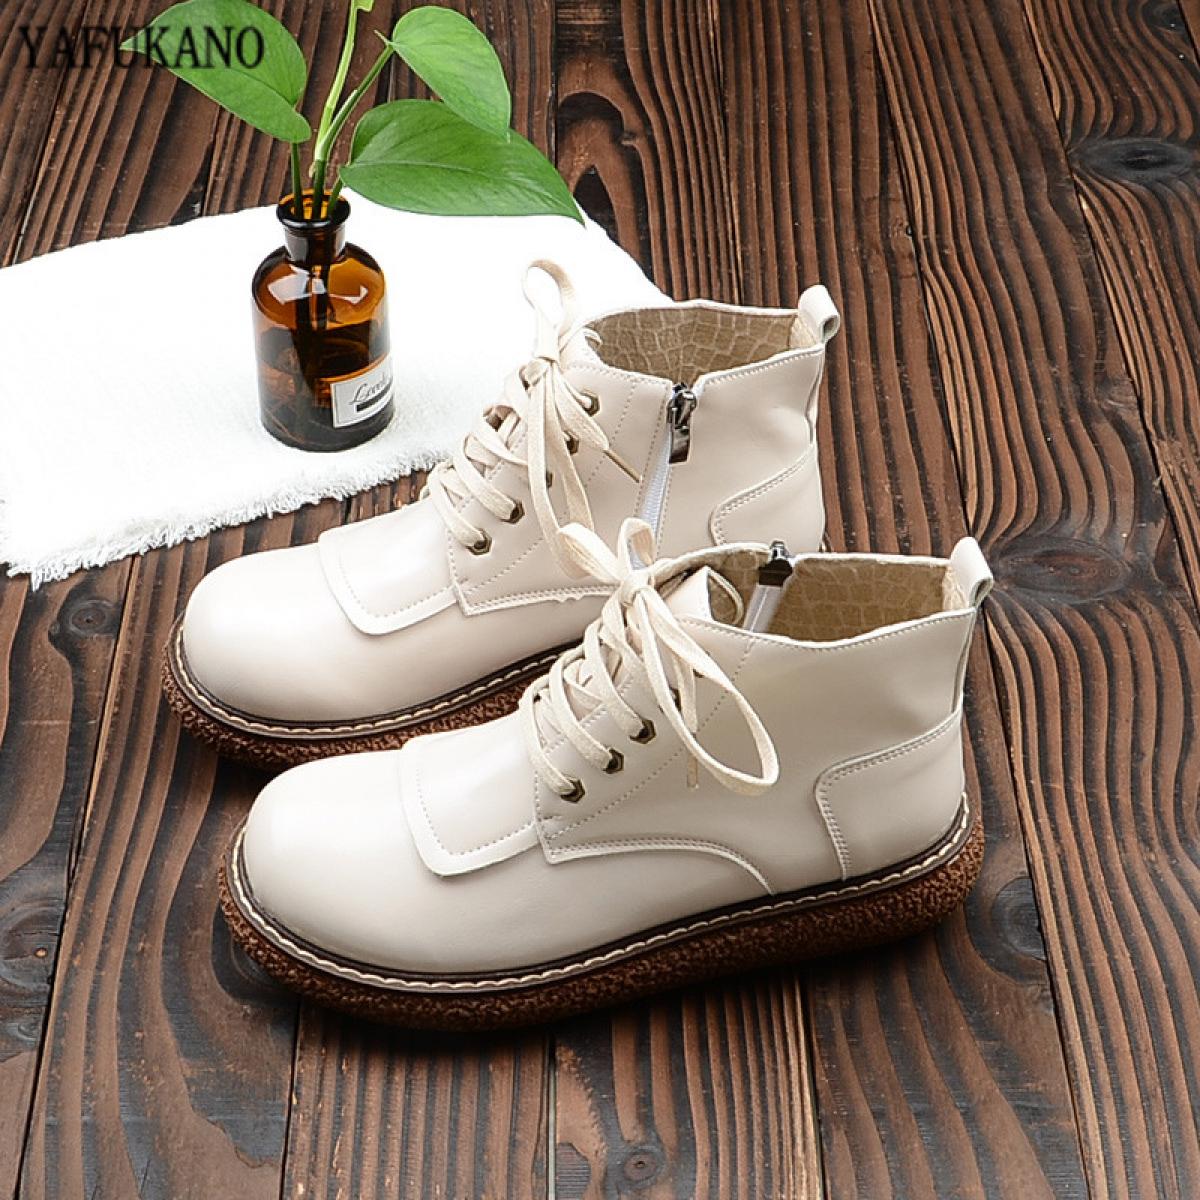  Style Thicksoled Big Head Doll Shoes Round Toe Laceup Retro Flat Women Boots Mori Girl Literary Casual Ankle Boots  Wom